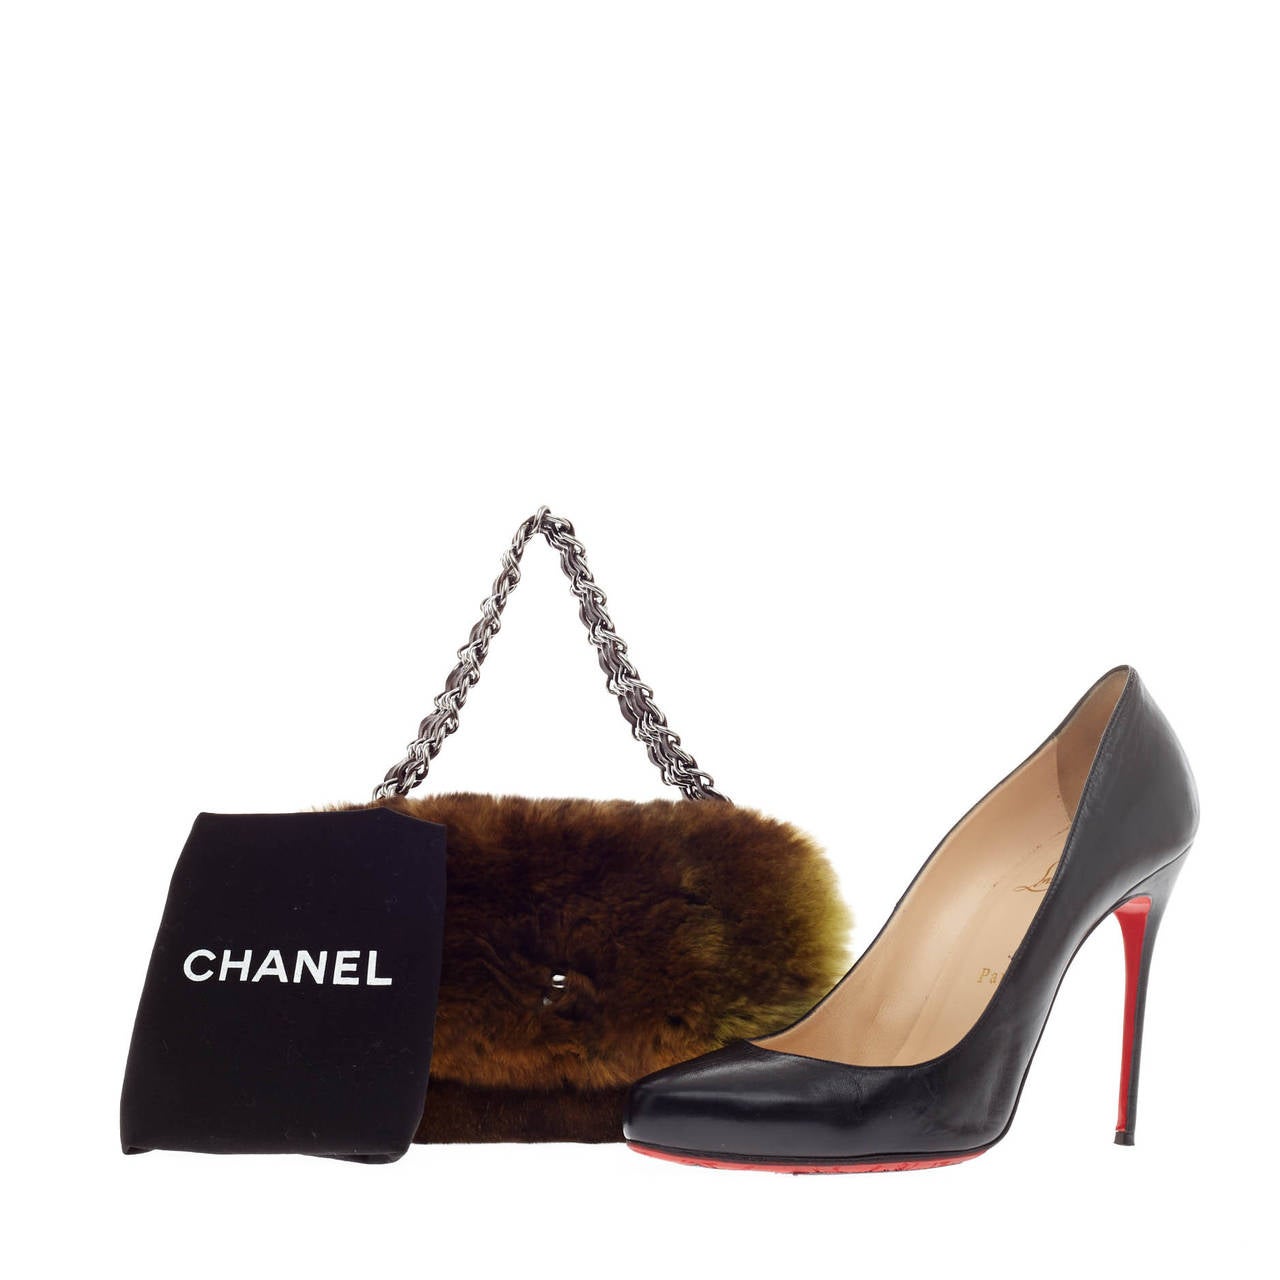 This authentic exotic Chanel Triple Chain Flap Lapin Fur is ideal for nights out and dressy occasions fit for the modern woman. Crafted in genuine shades of brown and green rabbit fur, this stylish and elegant piece features a silver triple chain